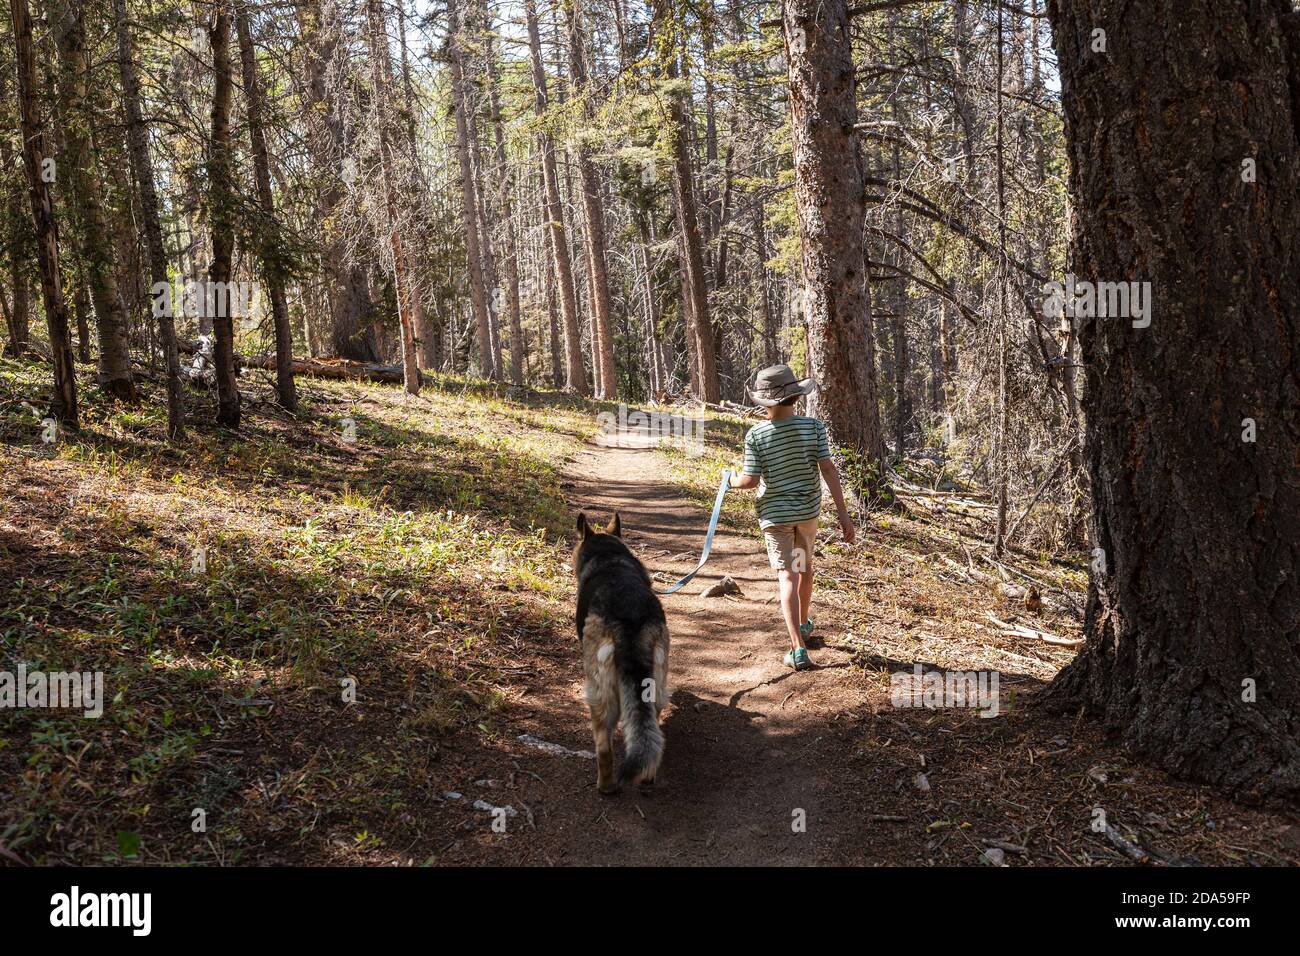 7 year old boy walking his dog in forest of Aspen trees Stock Photo